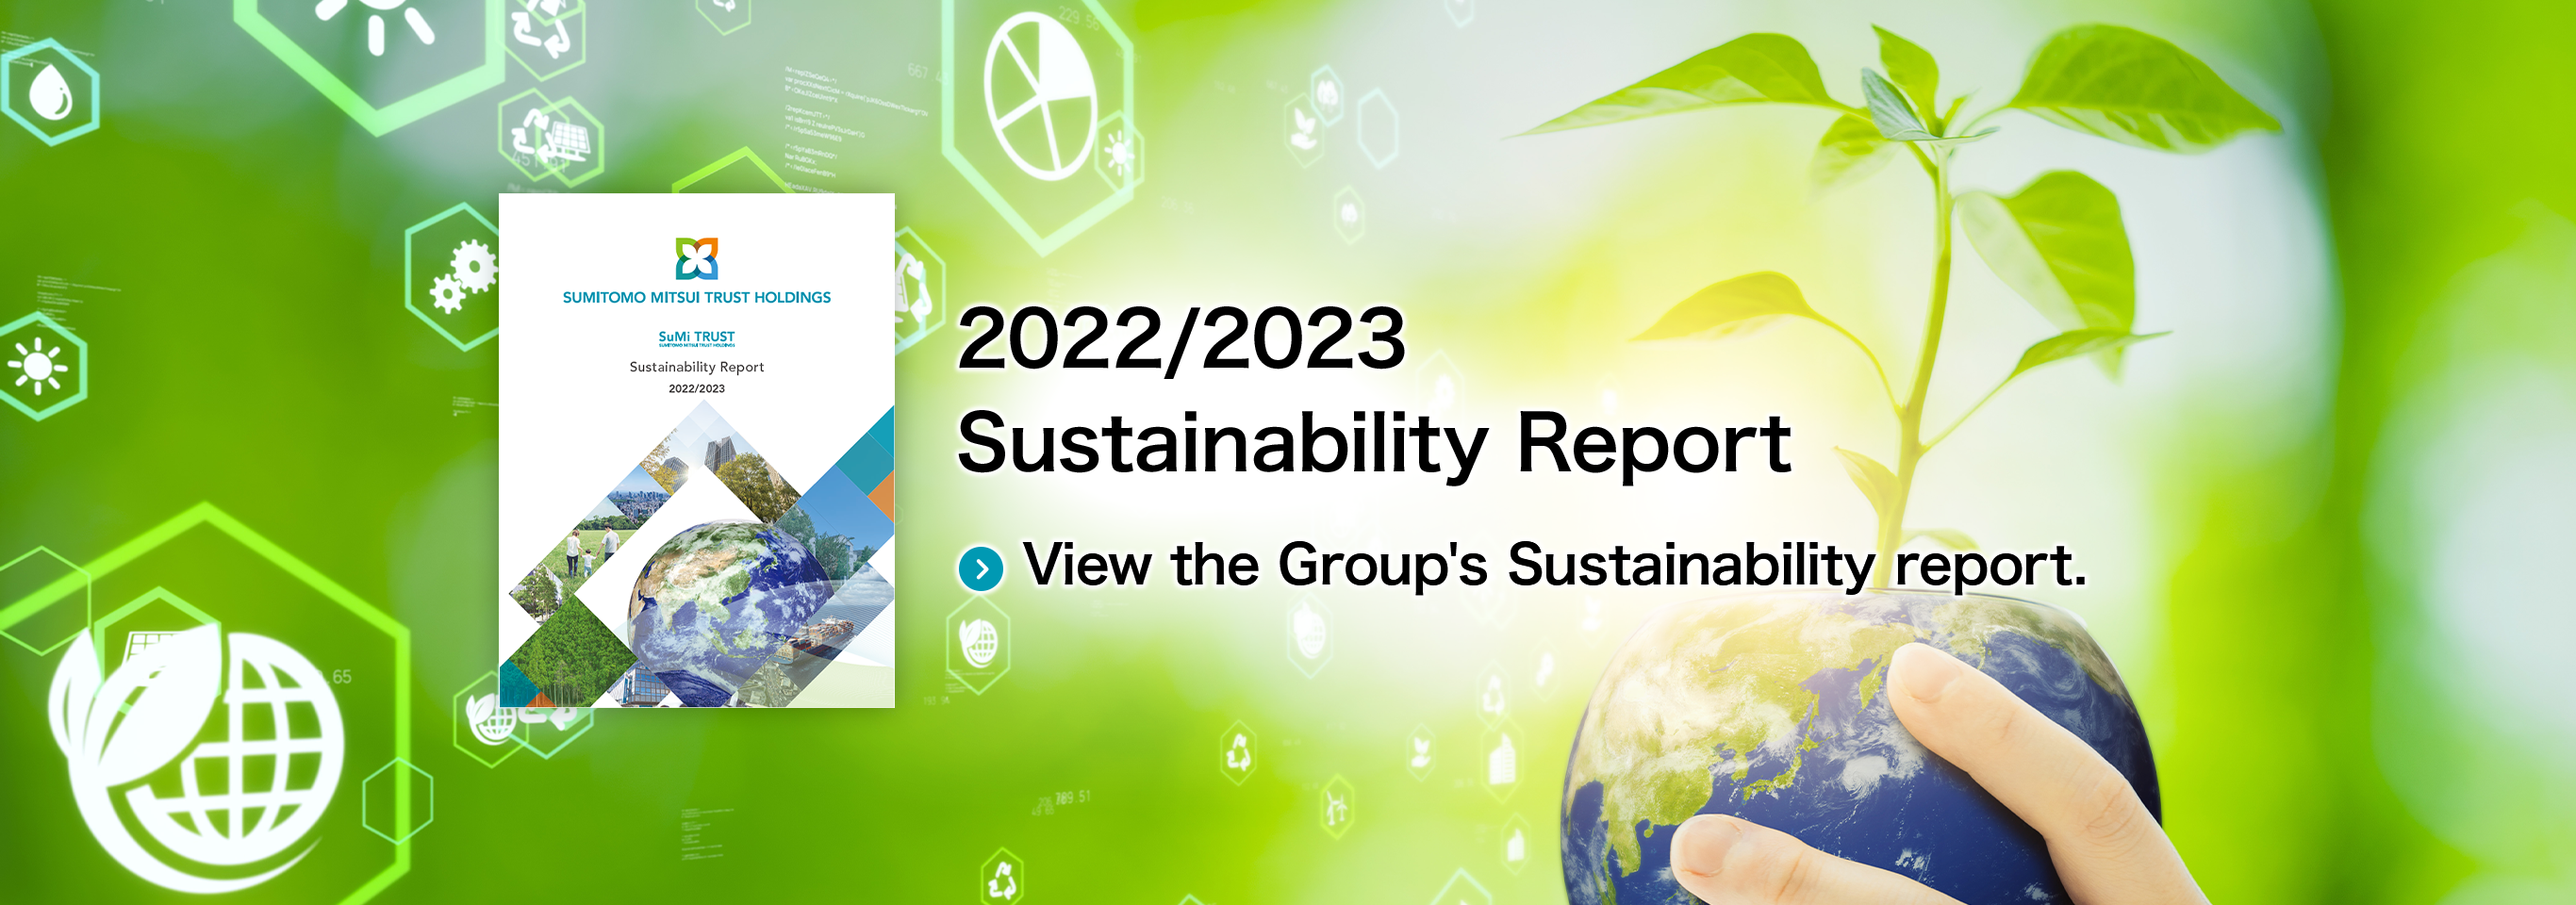 2021/2022 Sustainability Report View the Group's Sustainability reports.